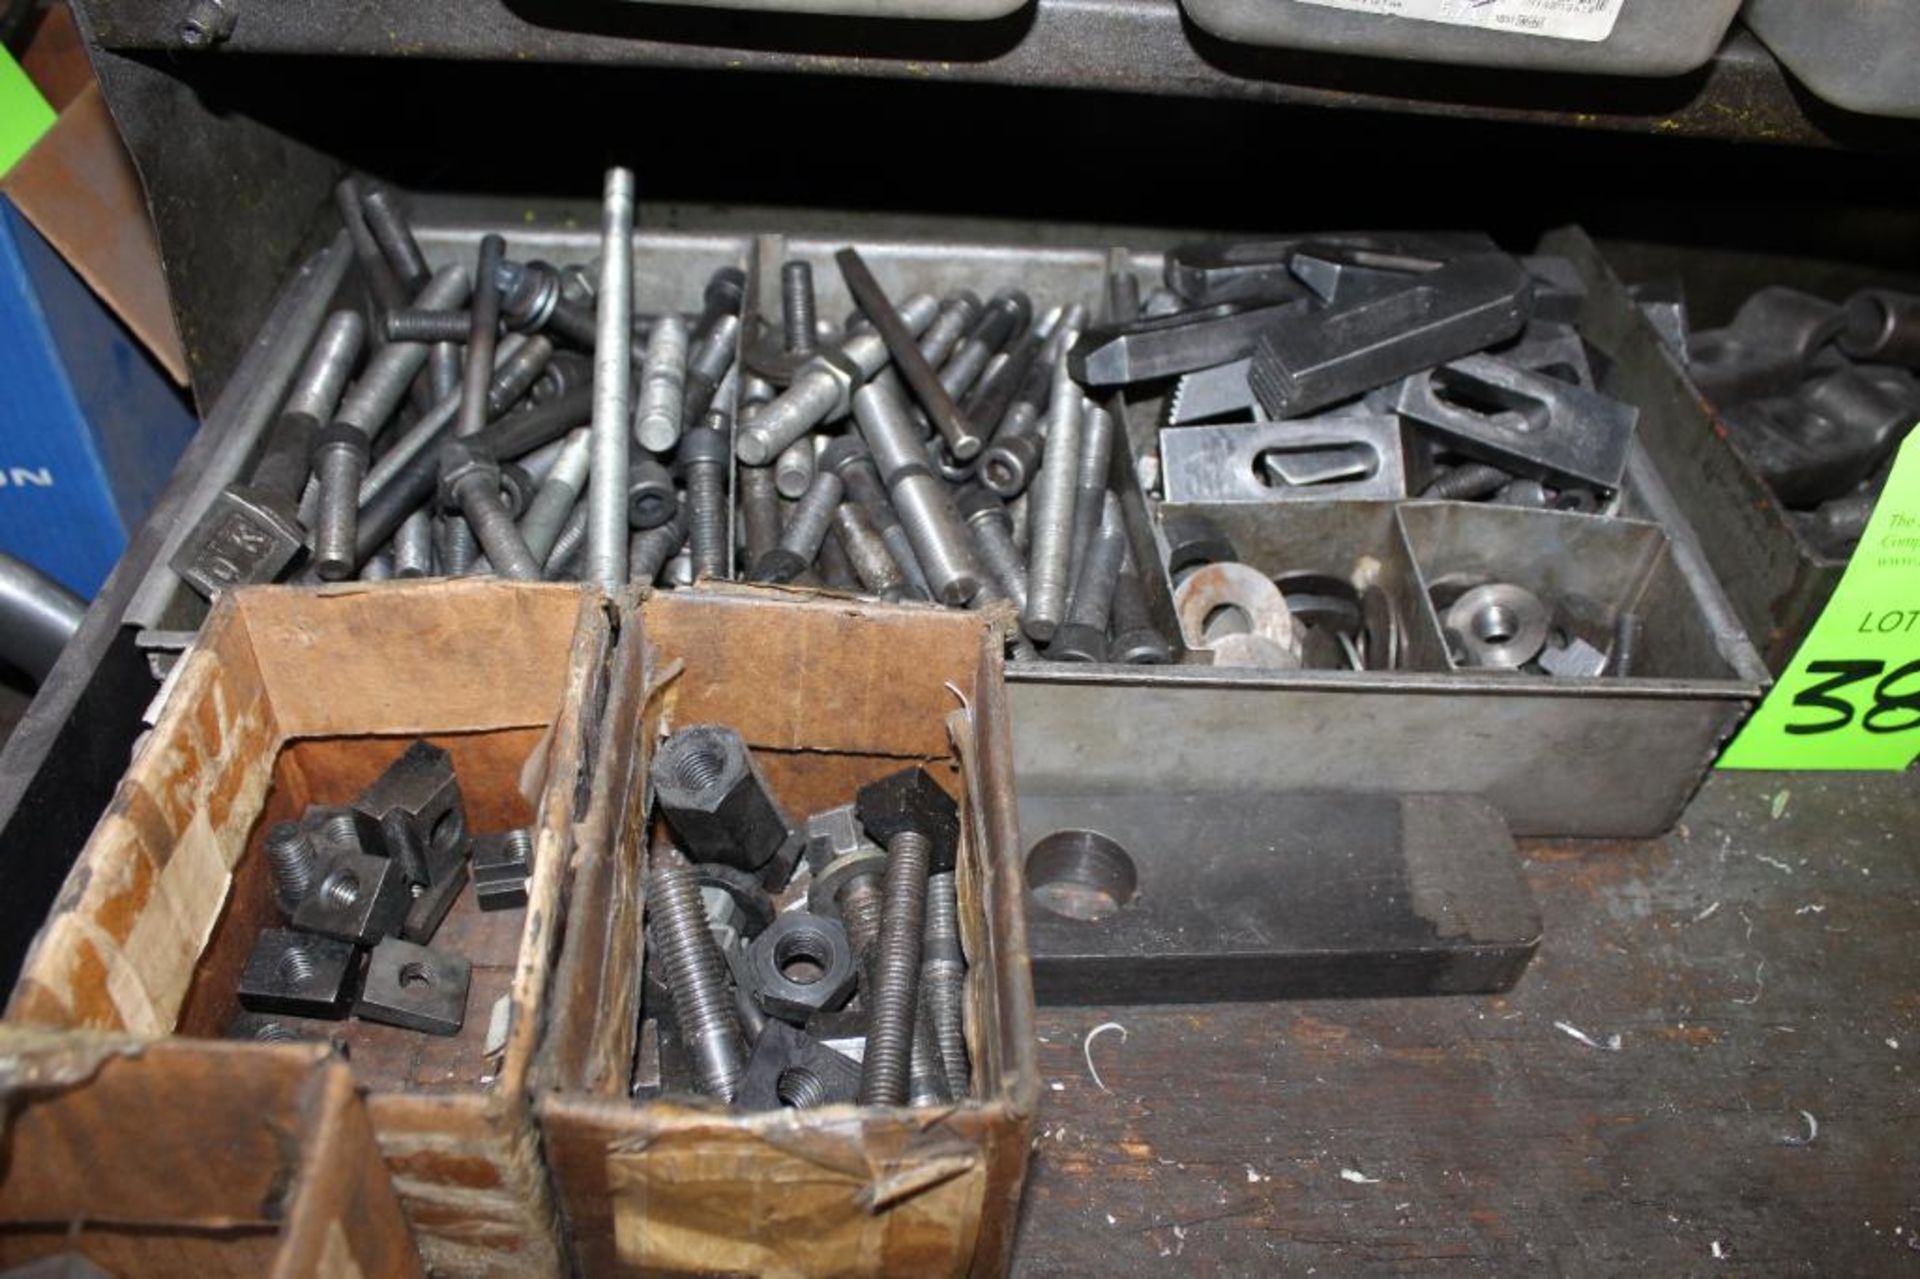 Contents of Cabinet and Tooling on Top